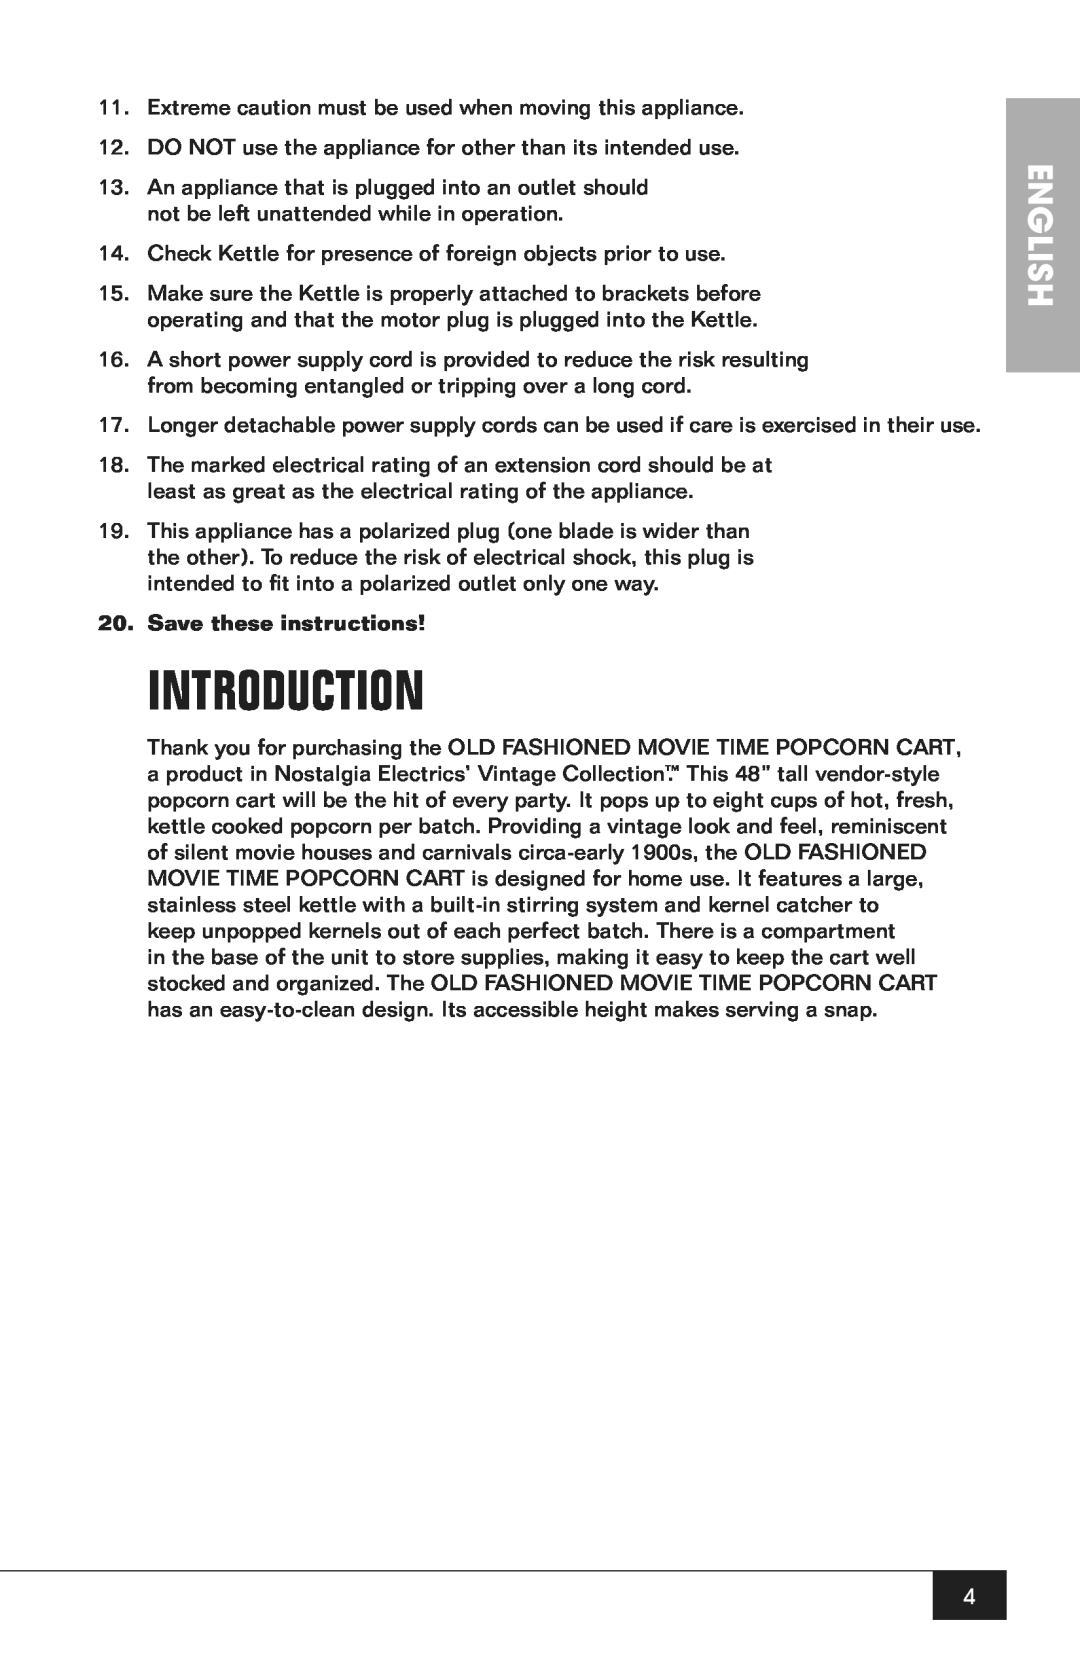 Nostalgia Electrics CCP200 manual Introduction, English, Save these instructions 